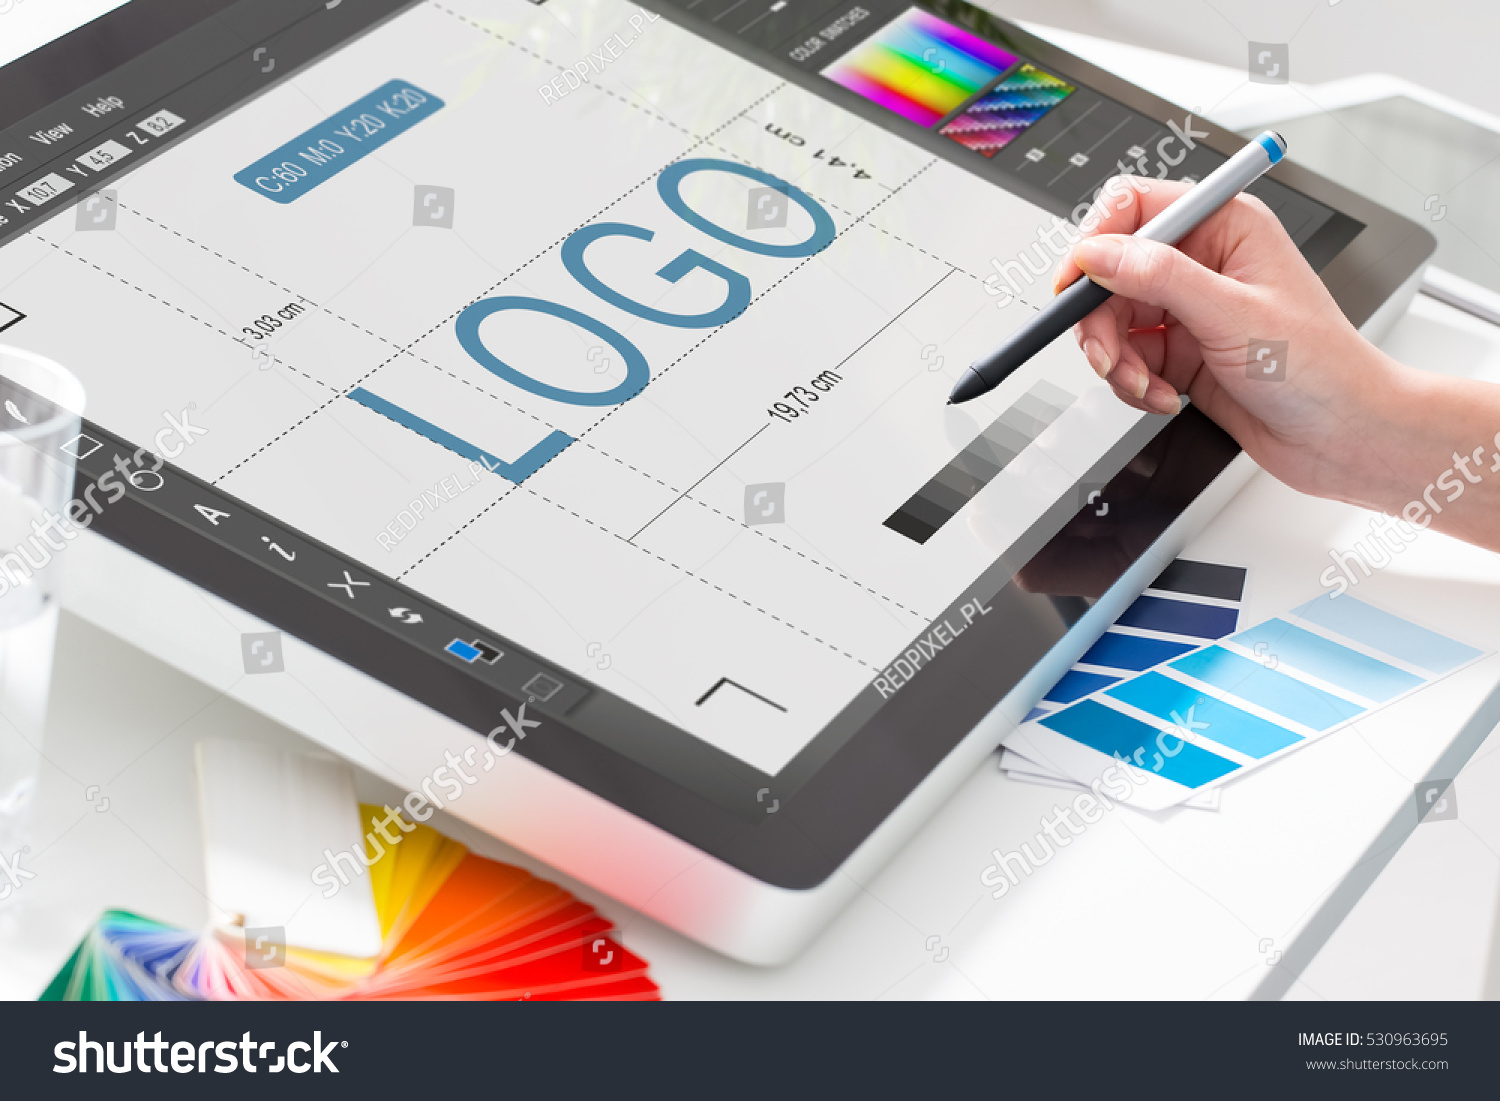 logo design brand designer sketch graphic drawing creative creativity draw studying work tablet concept - stock image #530963695